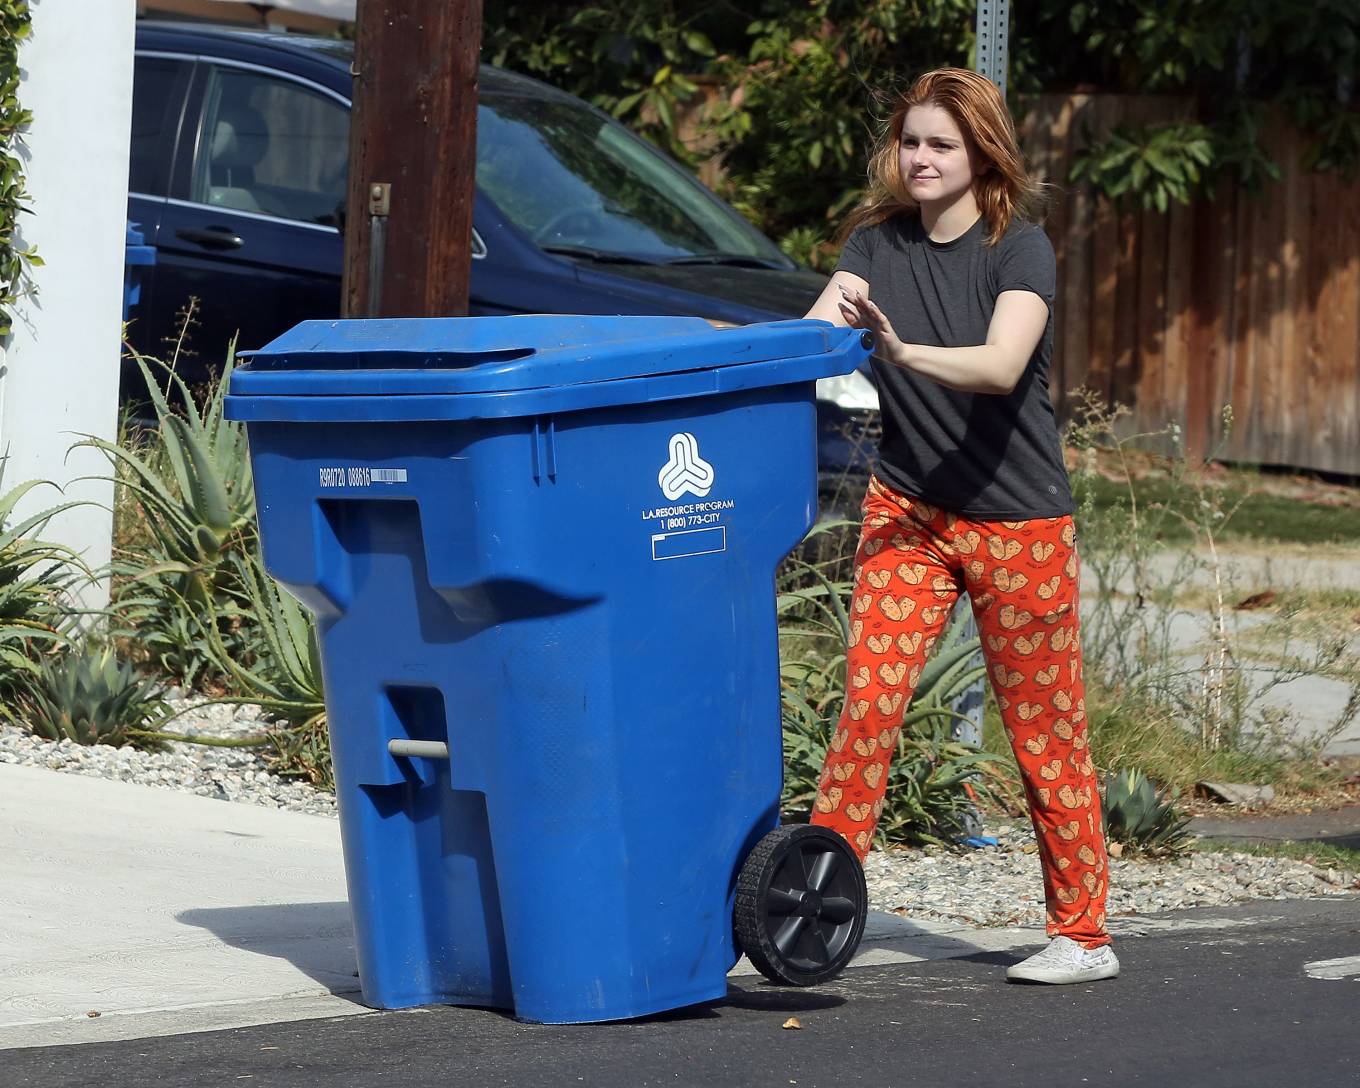 Ariel Winter 2021 : Ariel Winter – Putting out her recycled trash can in Los Angeles-04